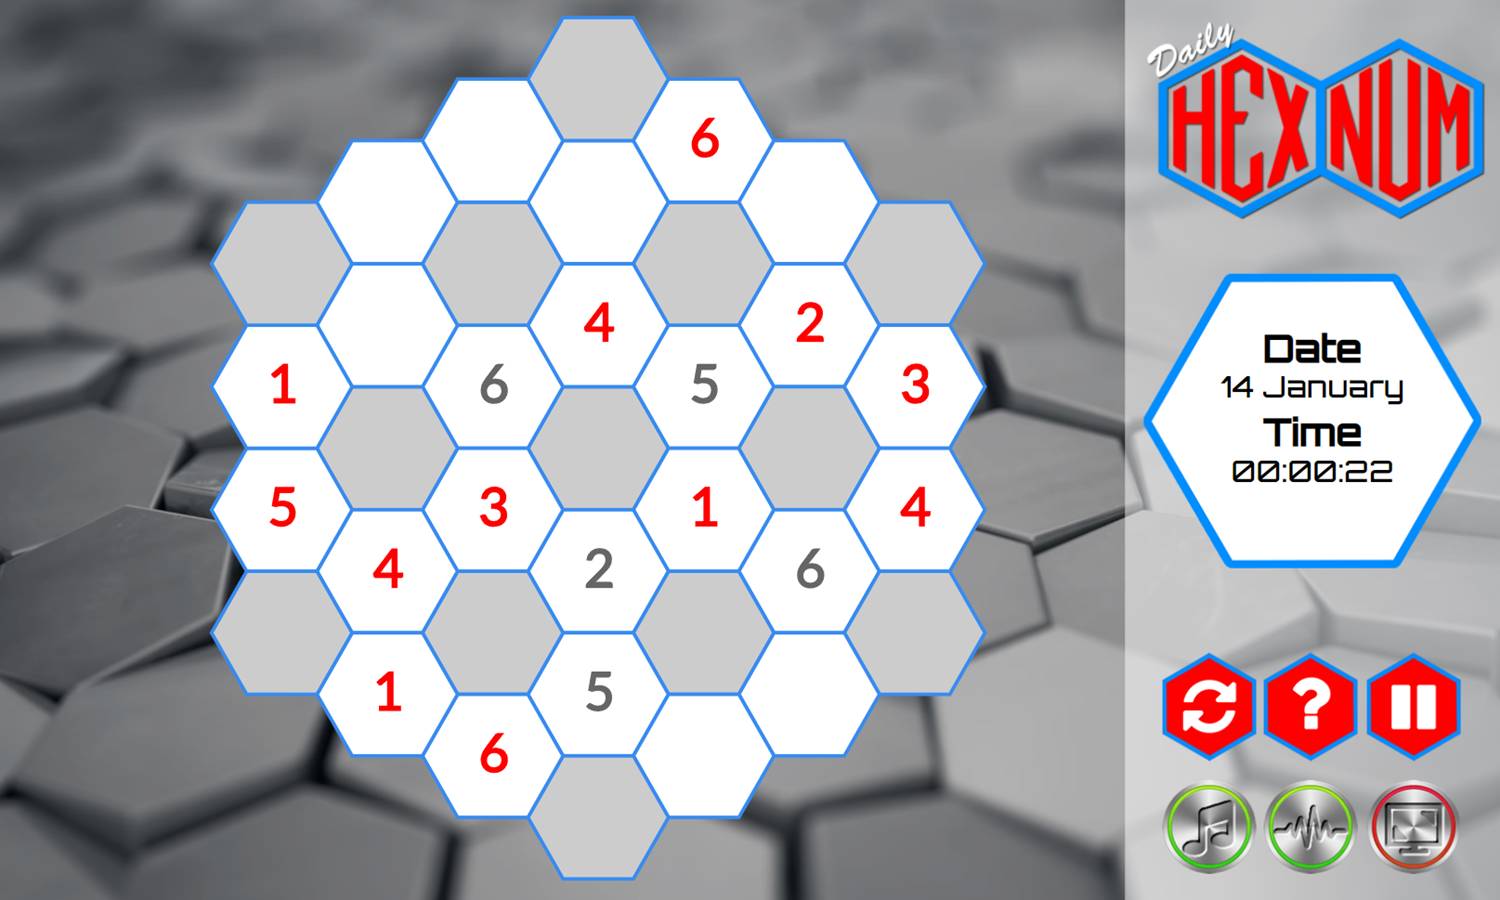 Daily Hex Num Game Solving Puzzle Screenshot.